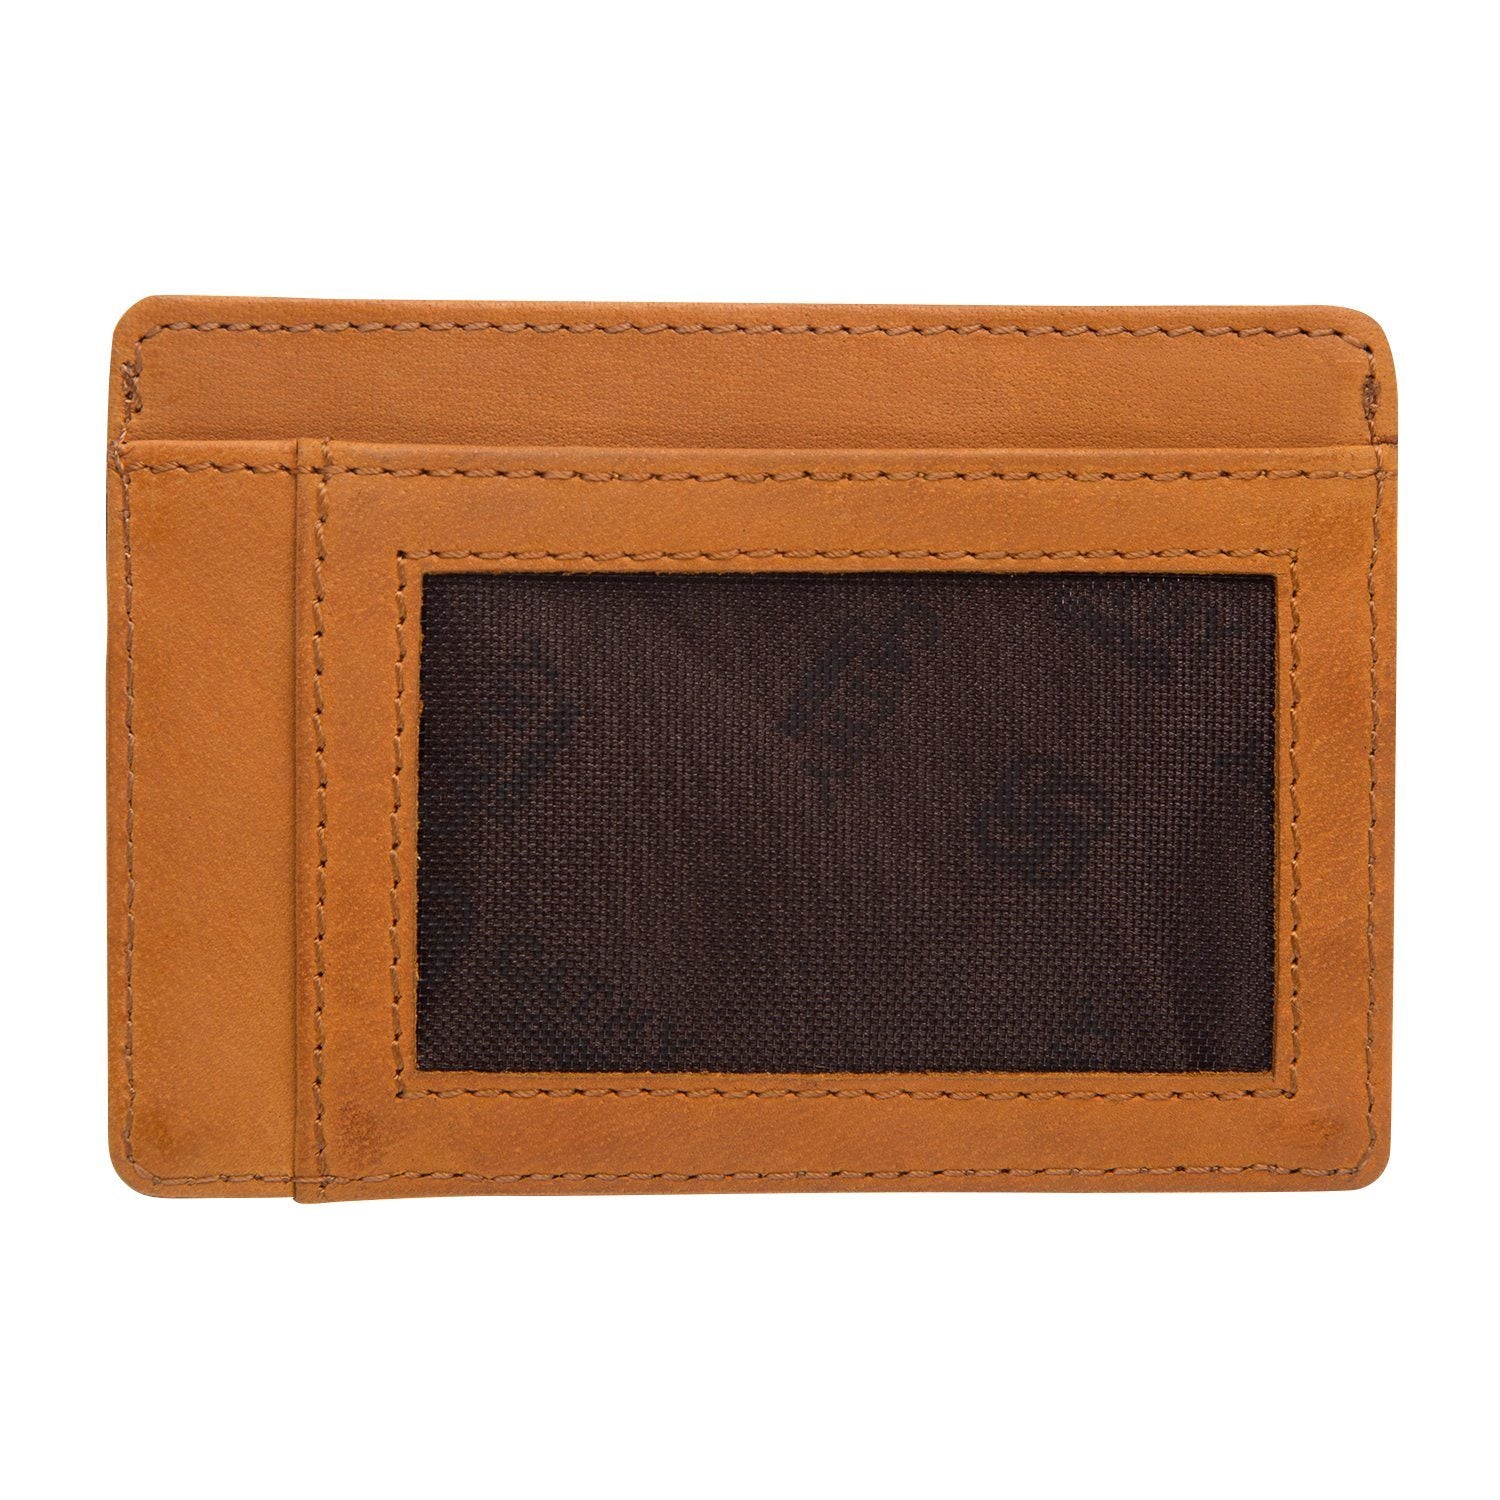 Tan Colour Italian Leather Card Holder/Slim Wallet (5 Card Slot + 1 ID Slot + Cash Compartment) Cathy London 